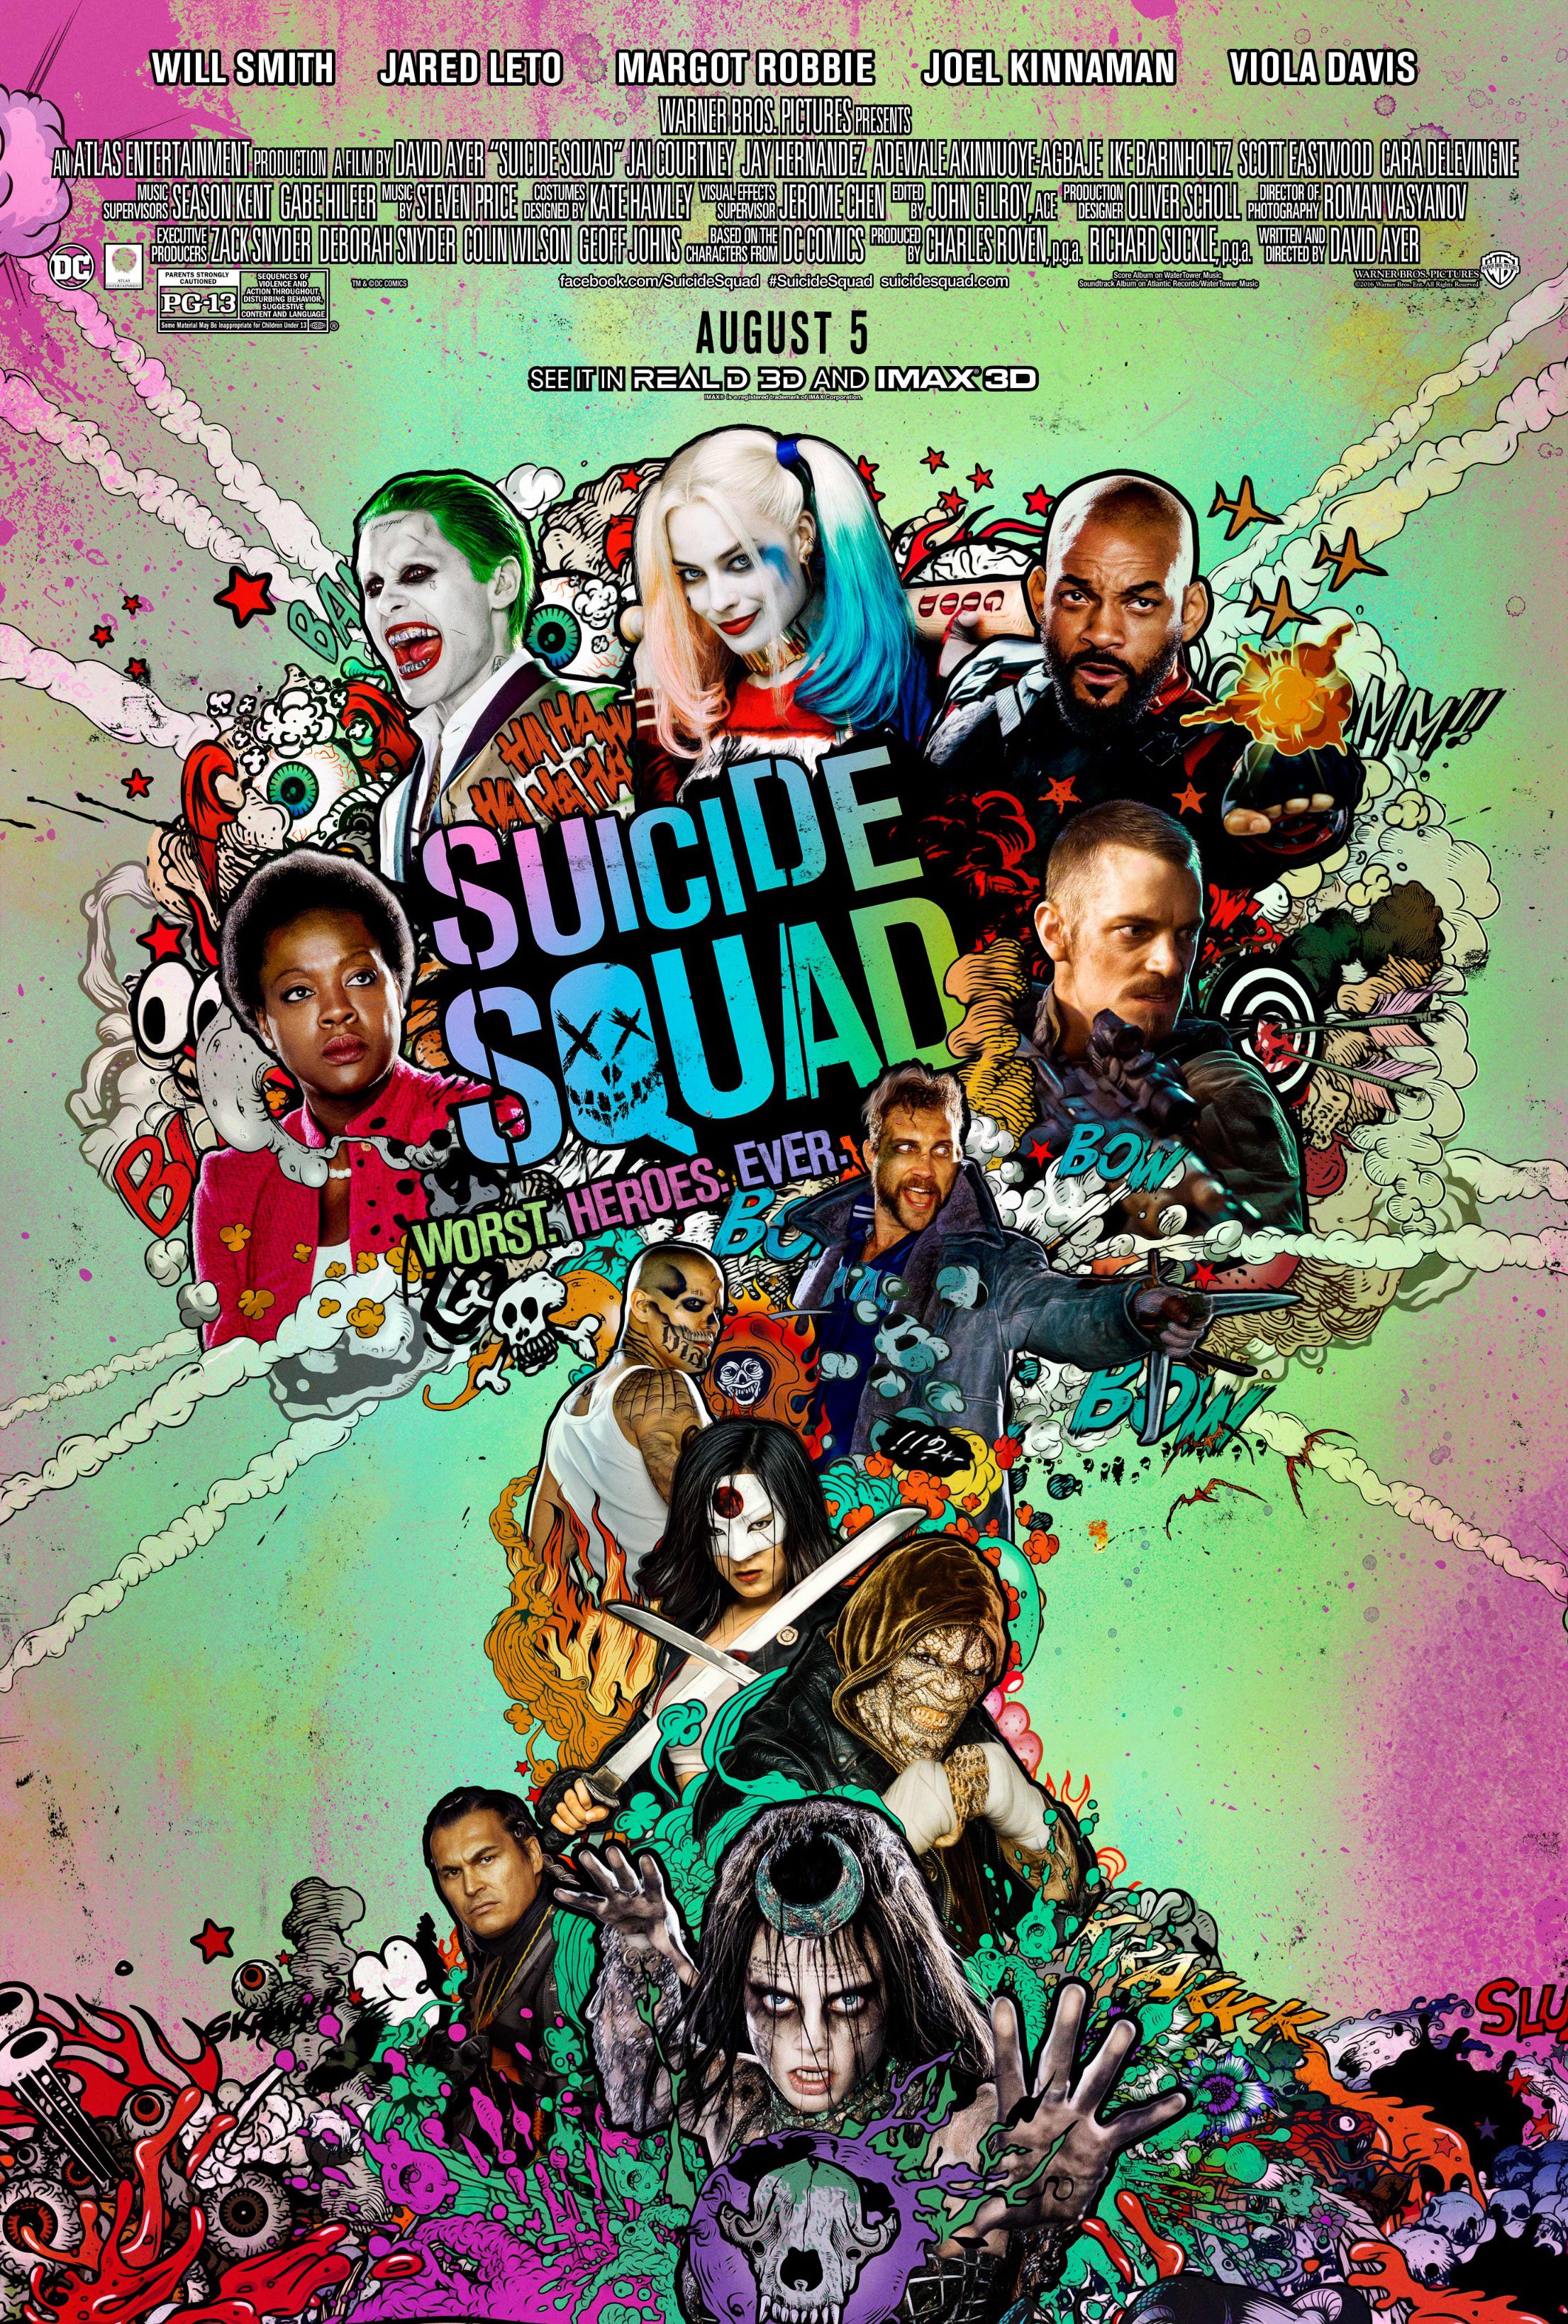 Suicide Squad: Characters Introduction Trailers